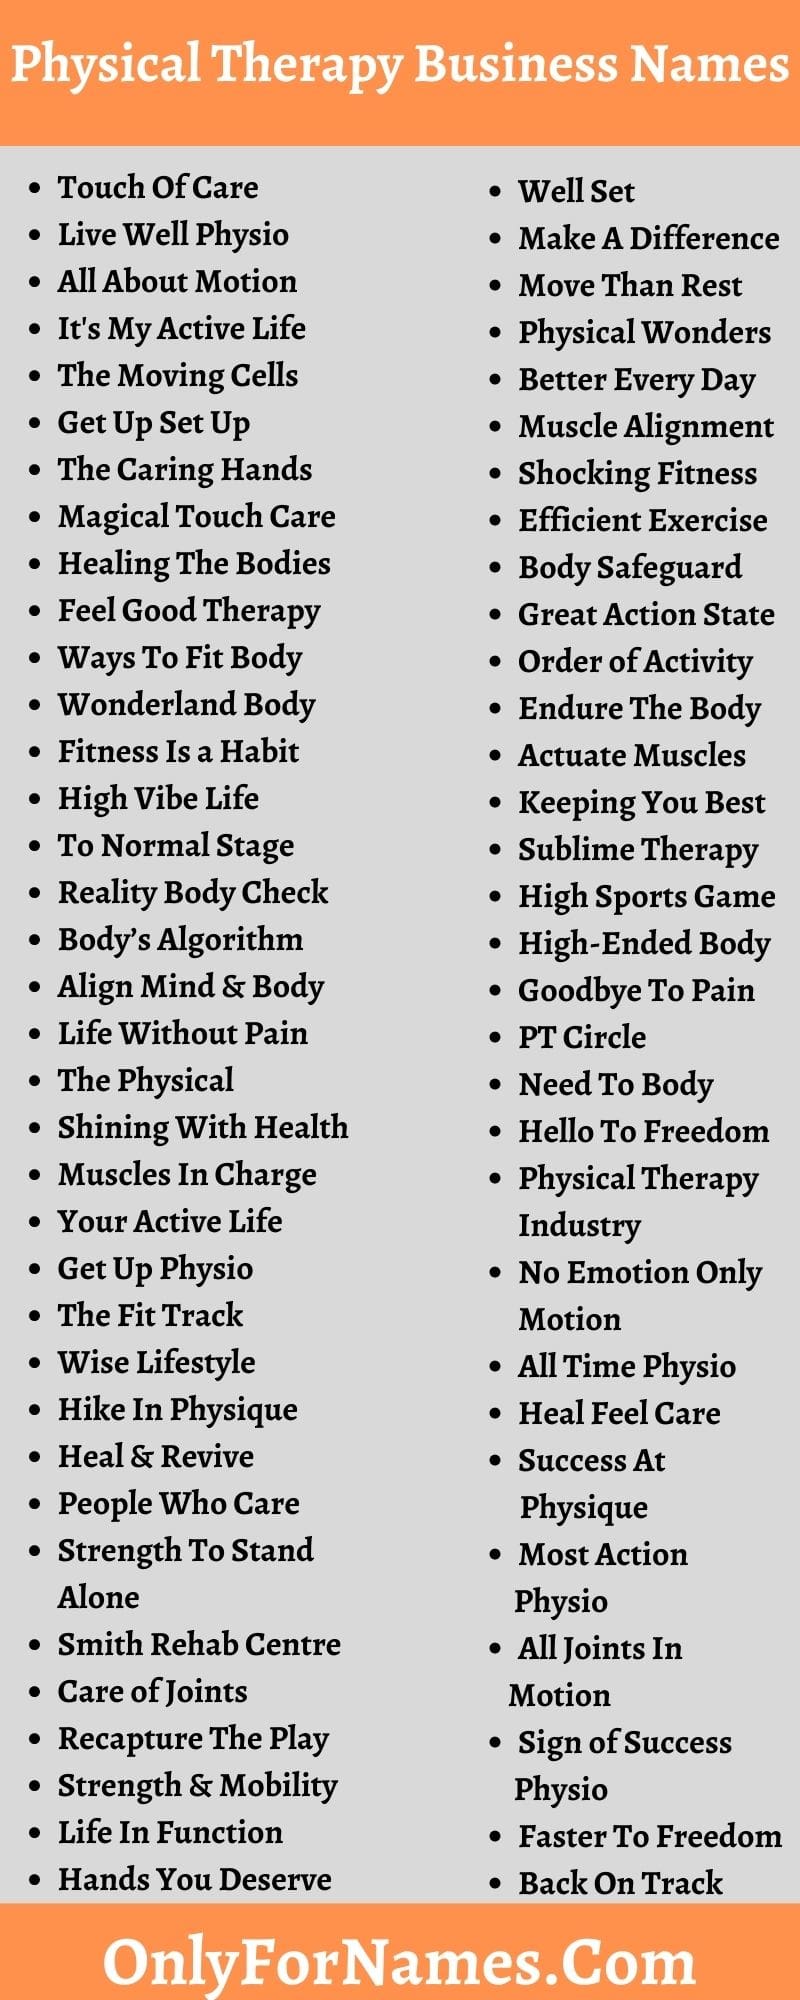 Physical Therapy Business Names